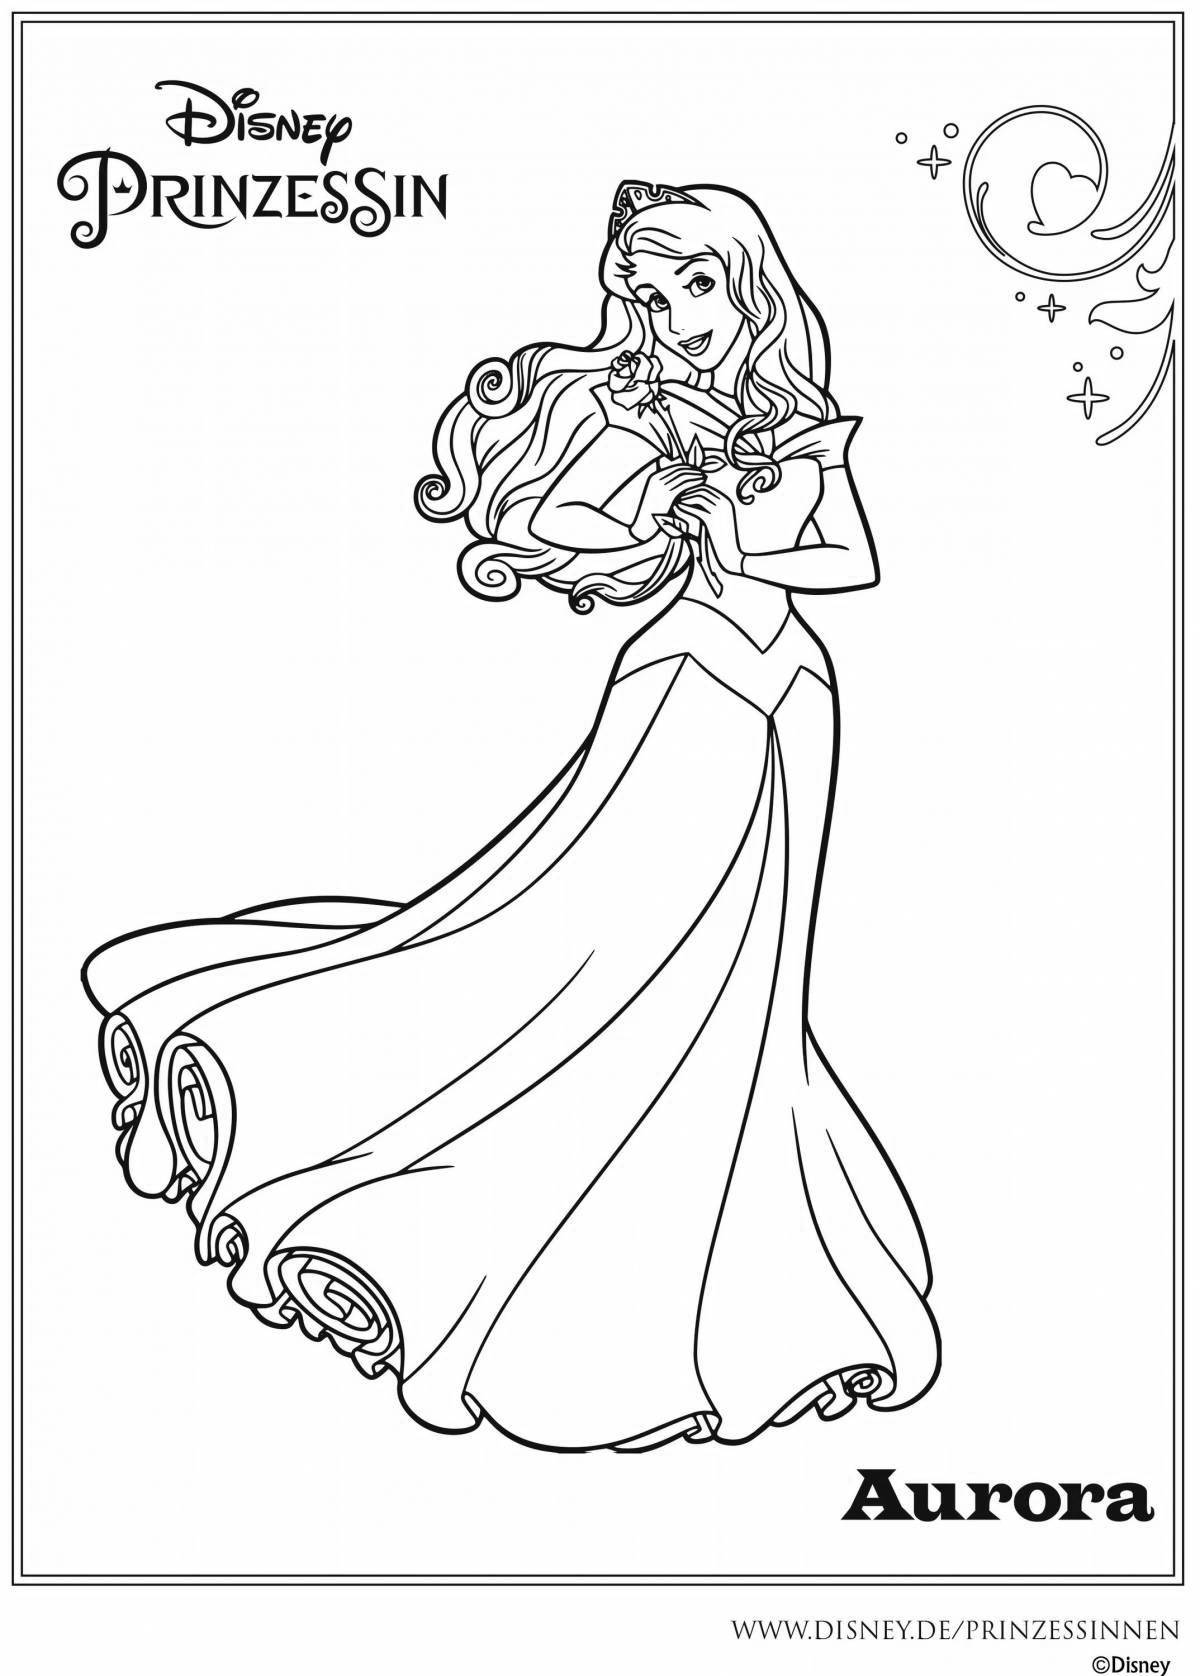 Fairytale aurora coloring book for kids